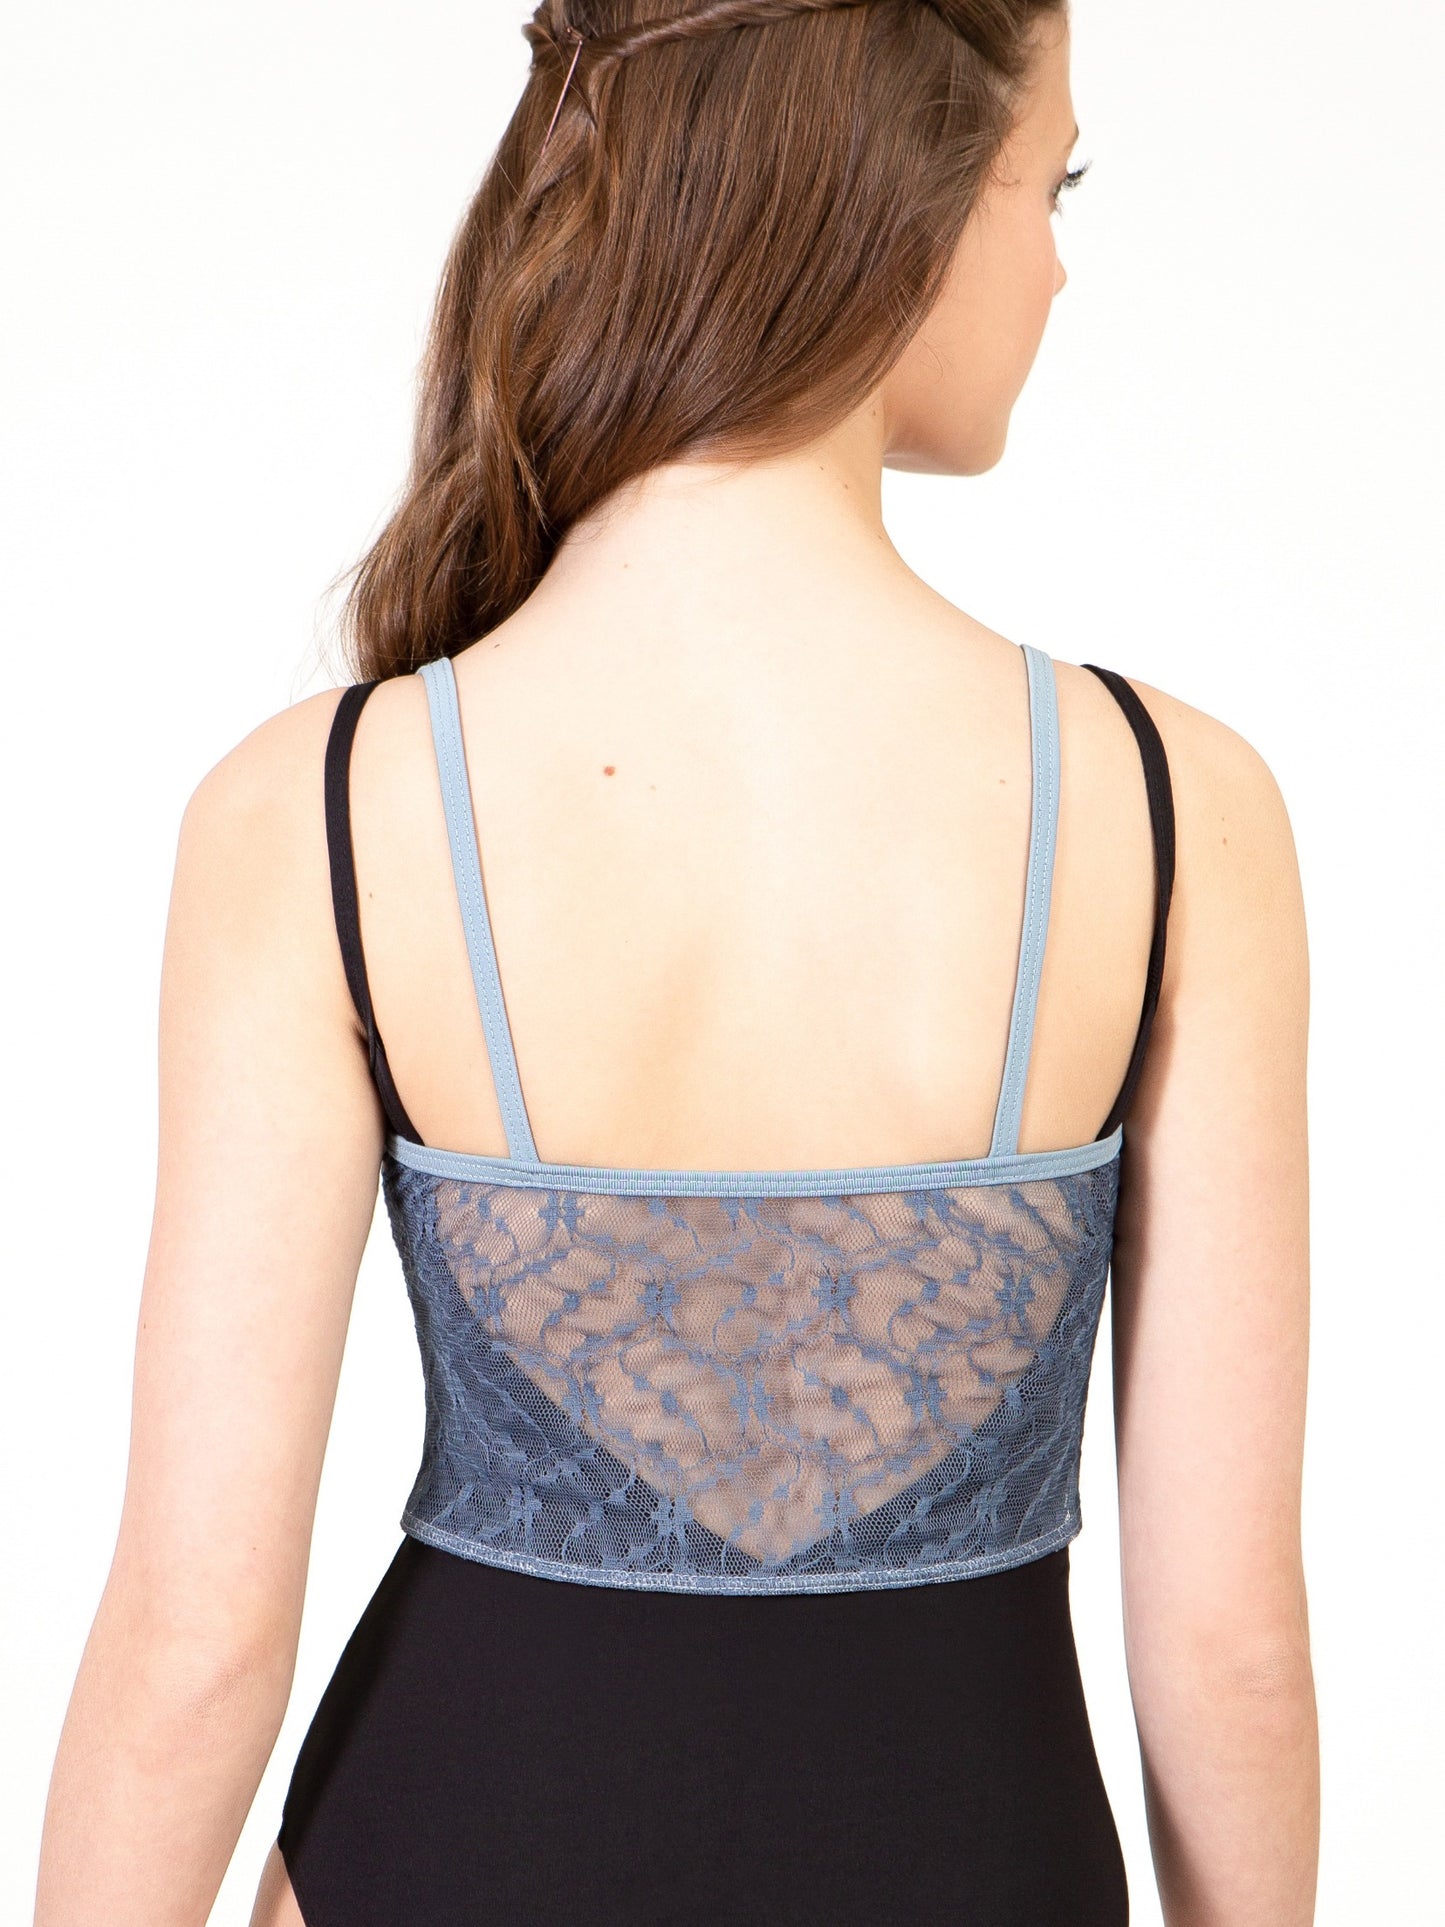 Chateau Lace Camisole Top - 4016A